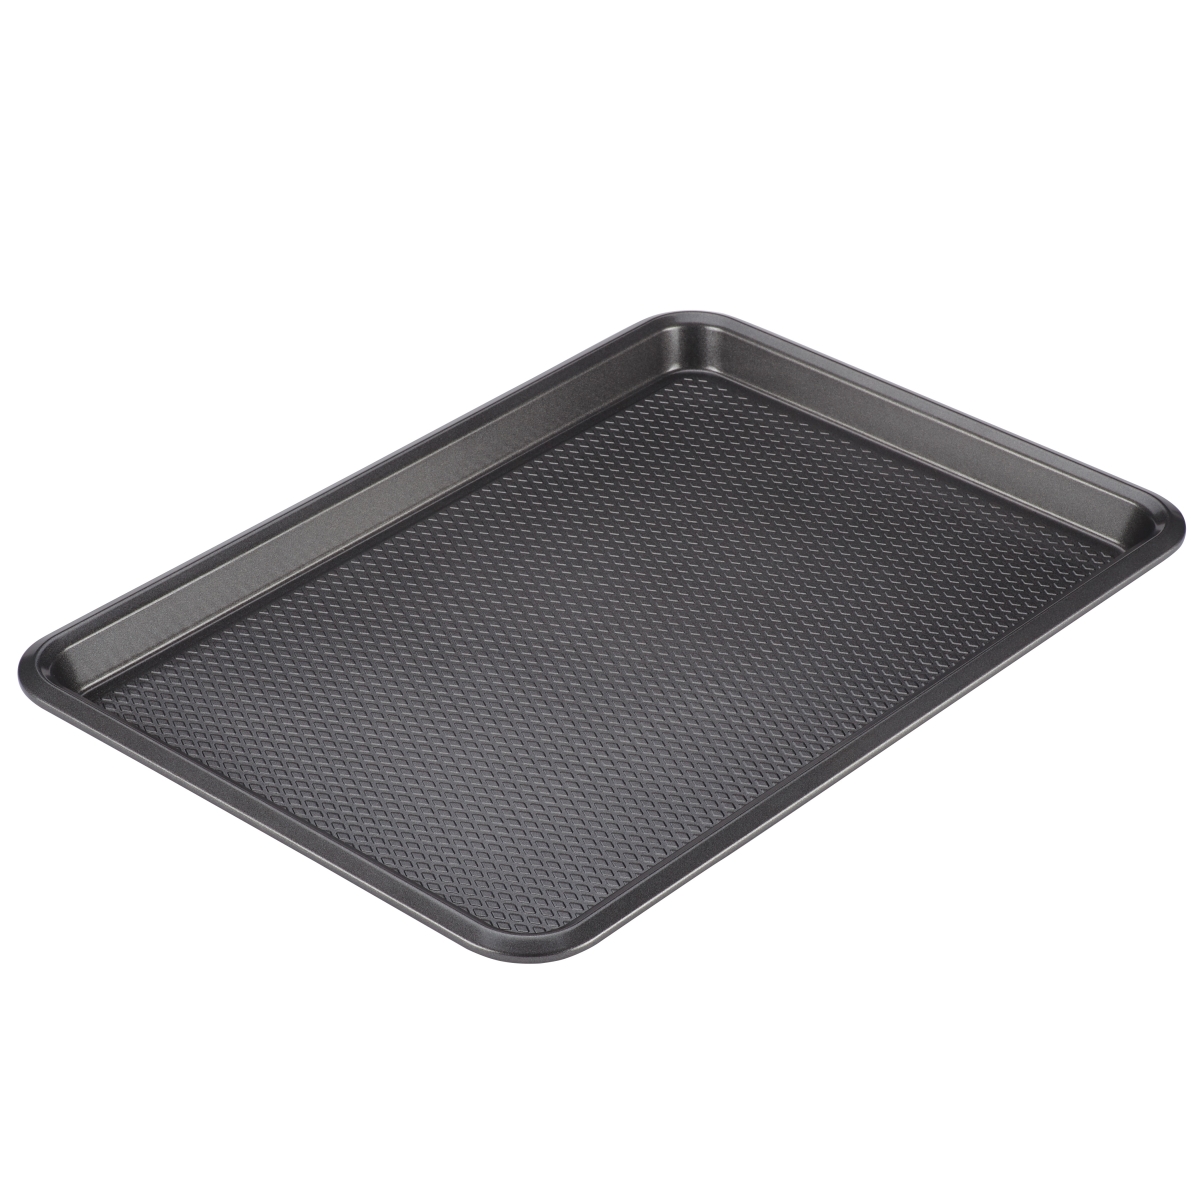 46996 Nonstick Cookie Pan, 11 X 17 In. - Silver